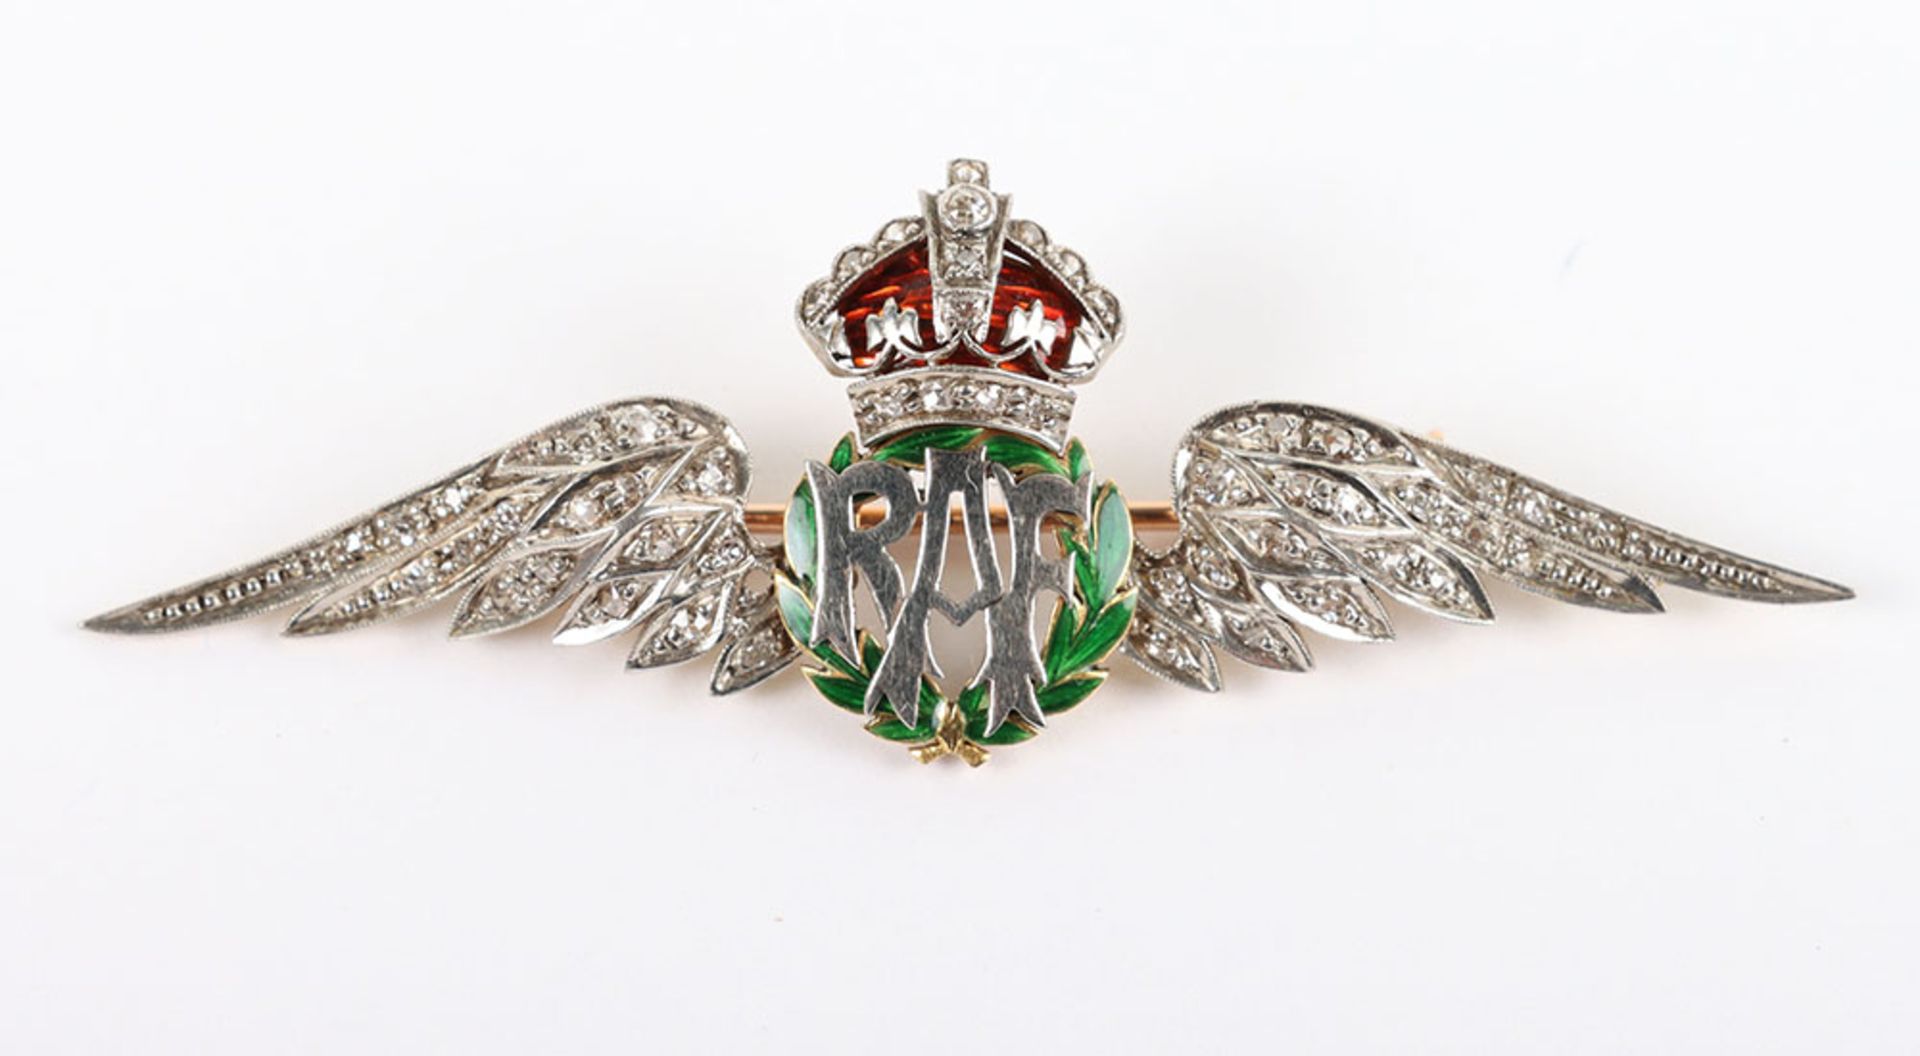 1930’s 18ct Gold, Platinum and Diamond Royal Air Force Sweetheart Brooch Retailed by Harrods, London - Image 4 of 7